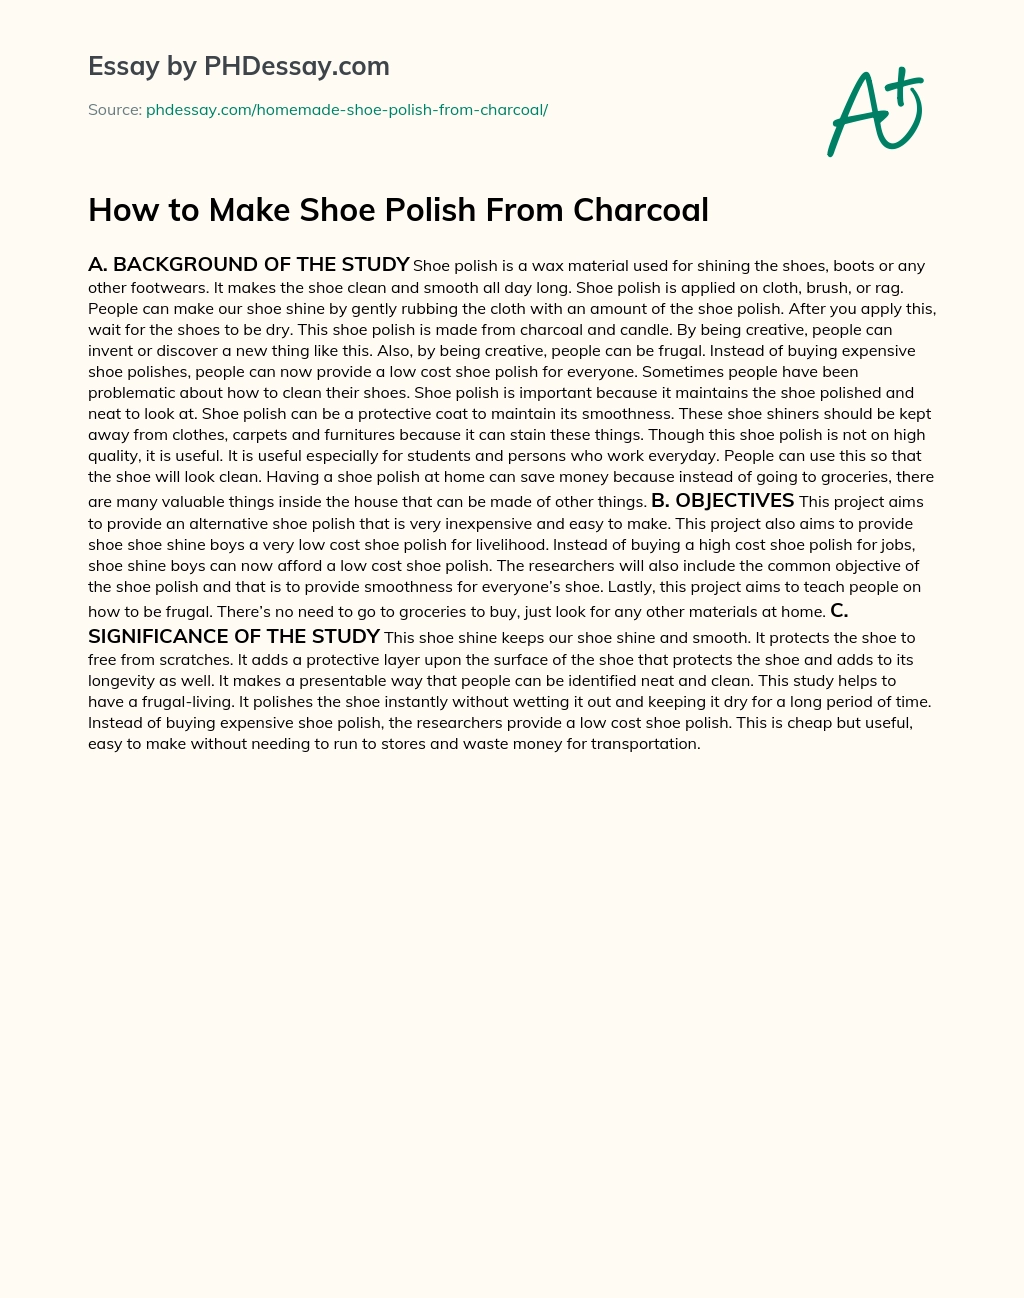 How to Make Shoe Polish From Charcoal essay